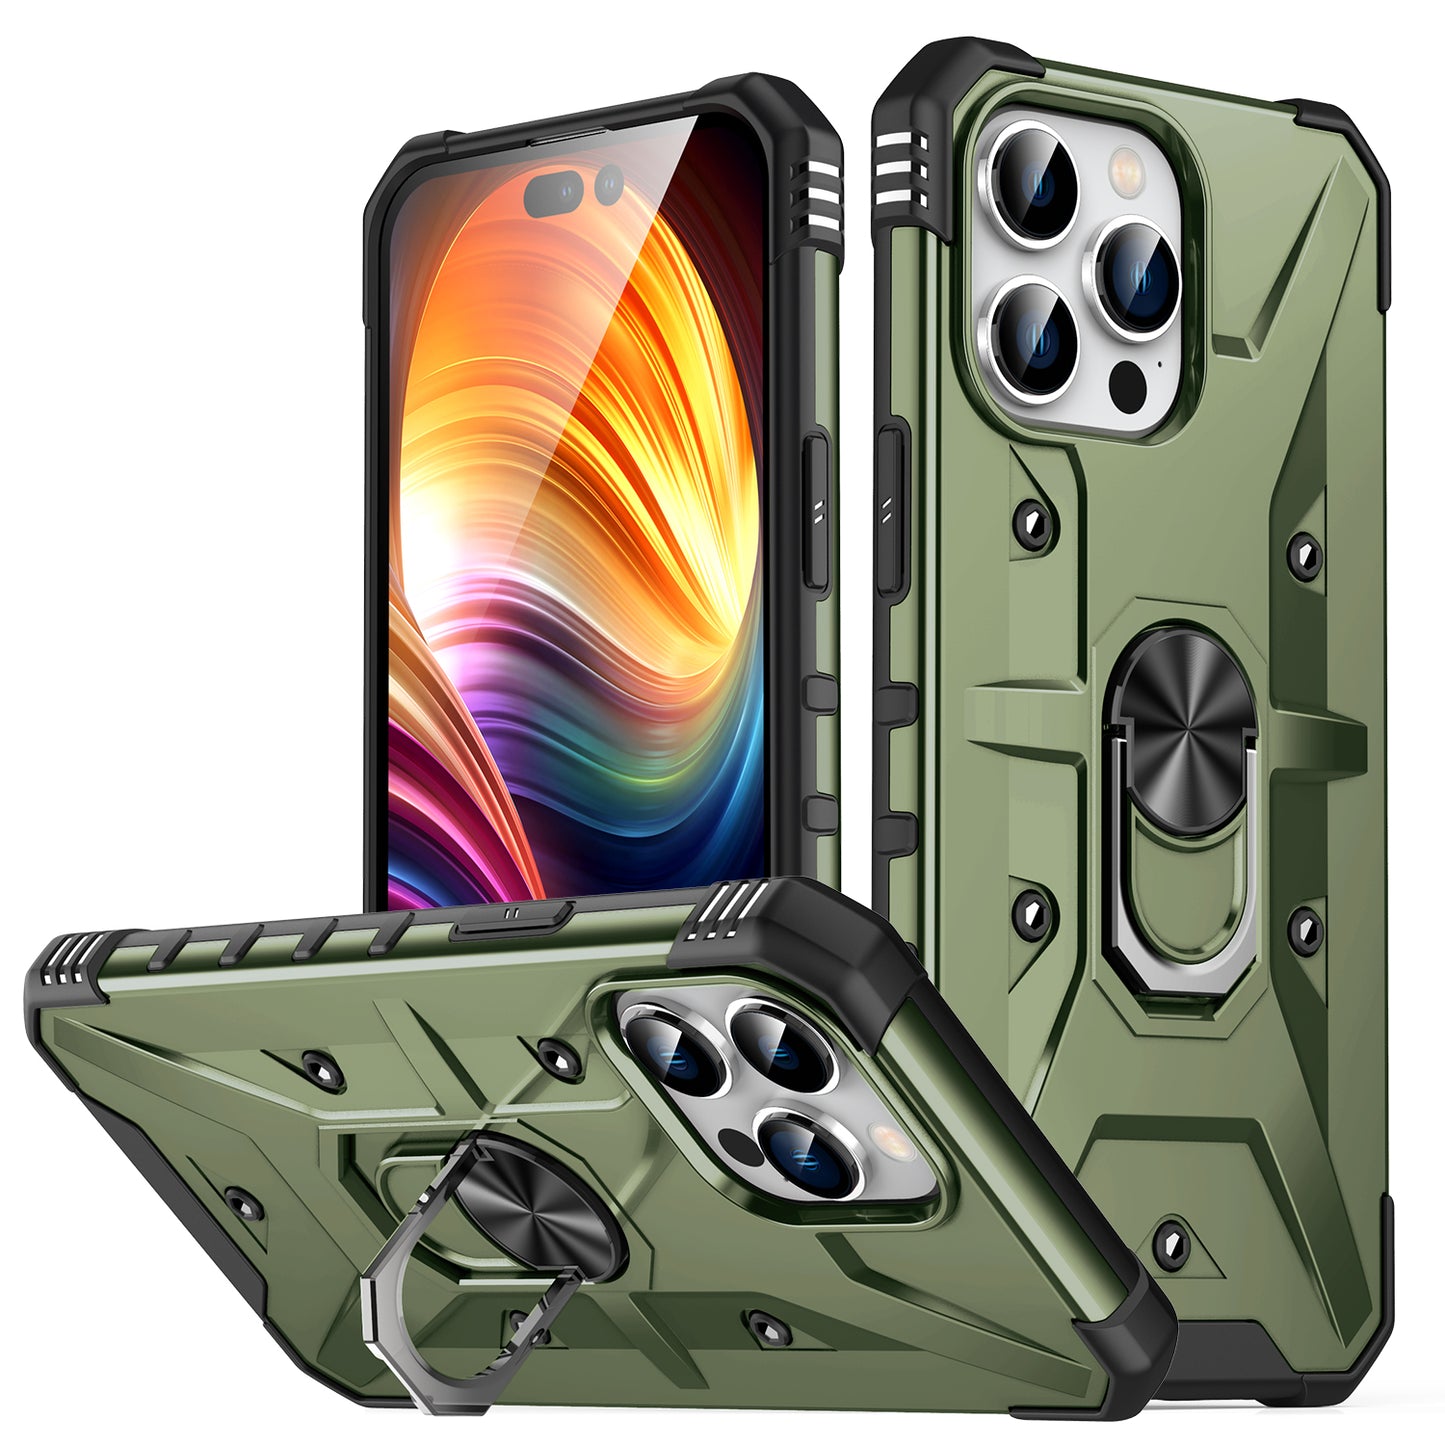 oem odm rugged phone case for iphone 11 shockproof armor cell phone case for iphone 11 pro max